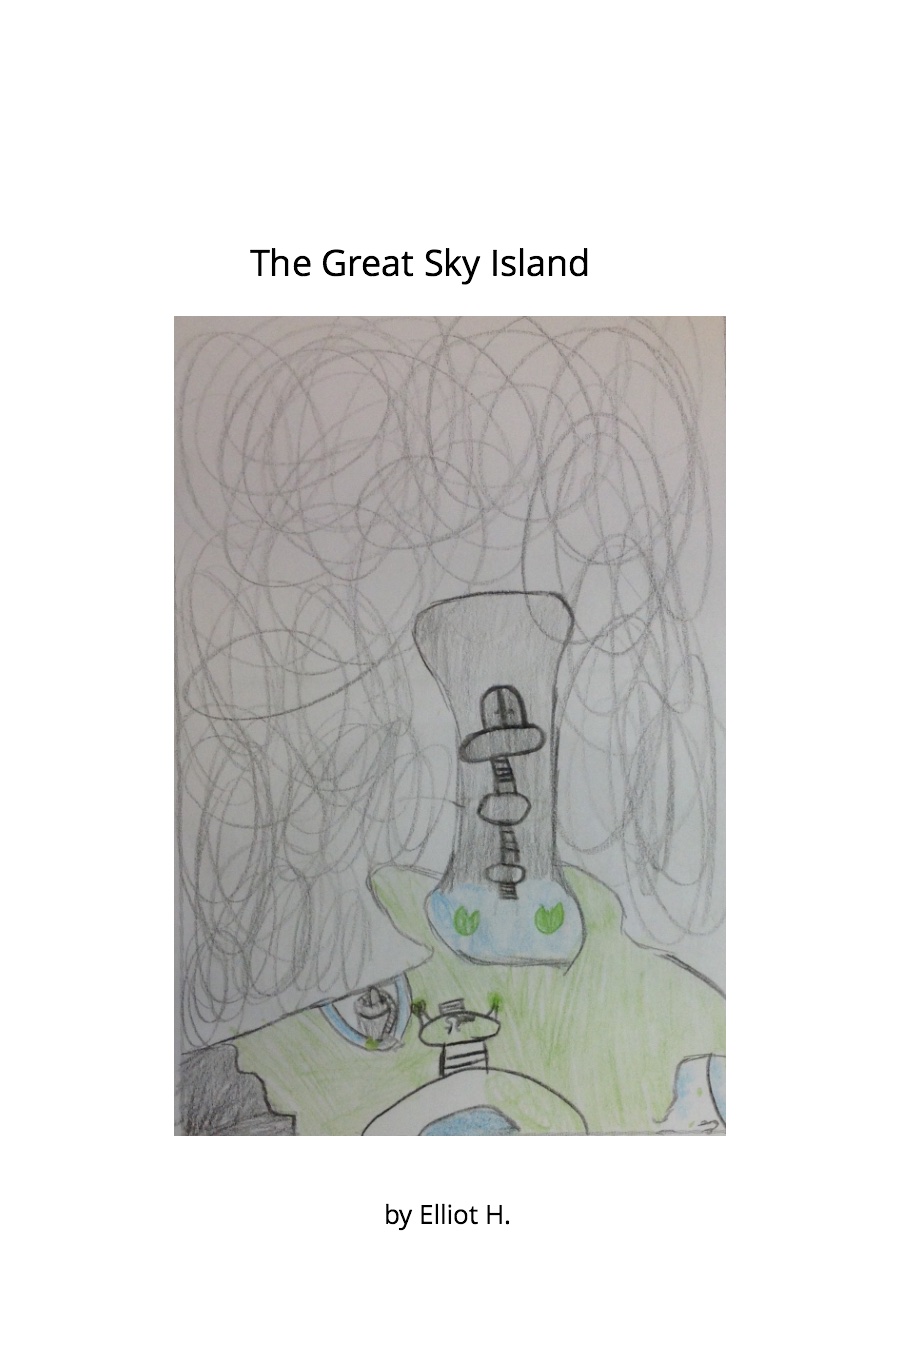 The Great Sky Island by Elliot H